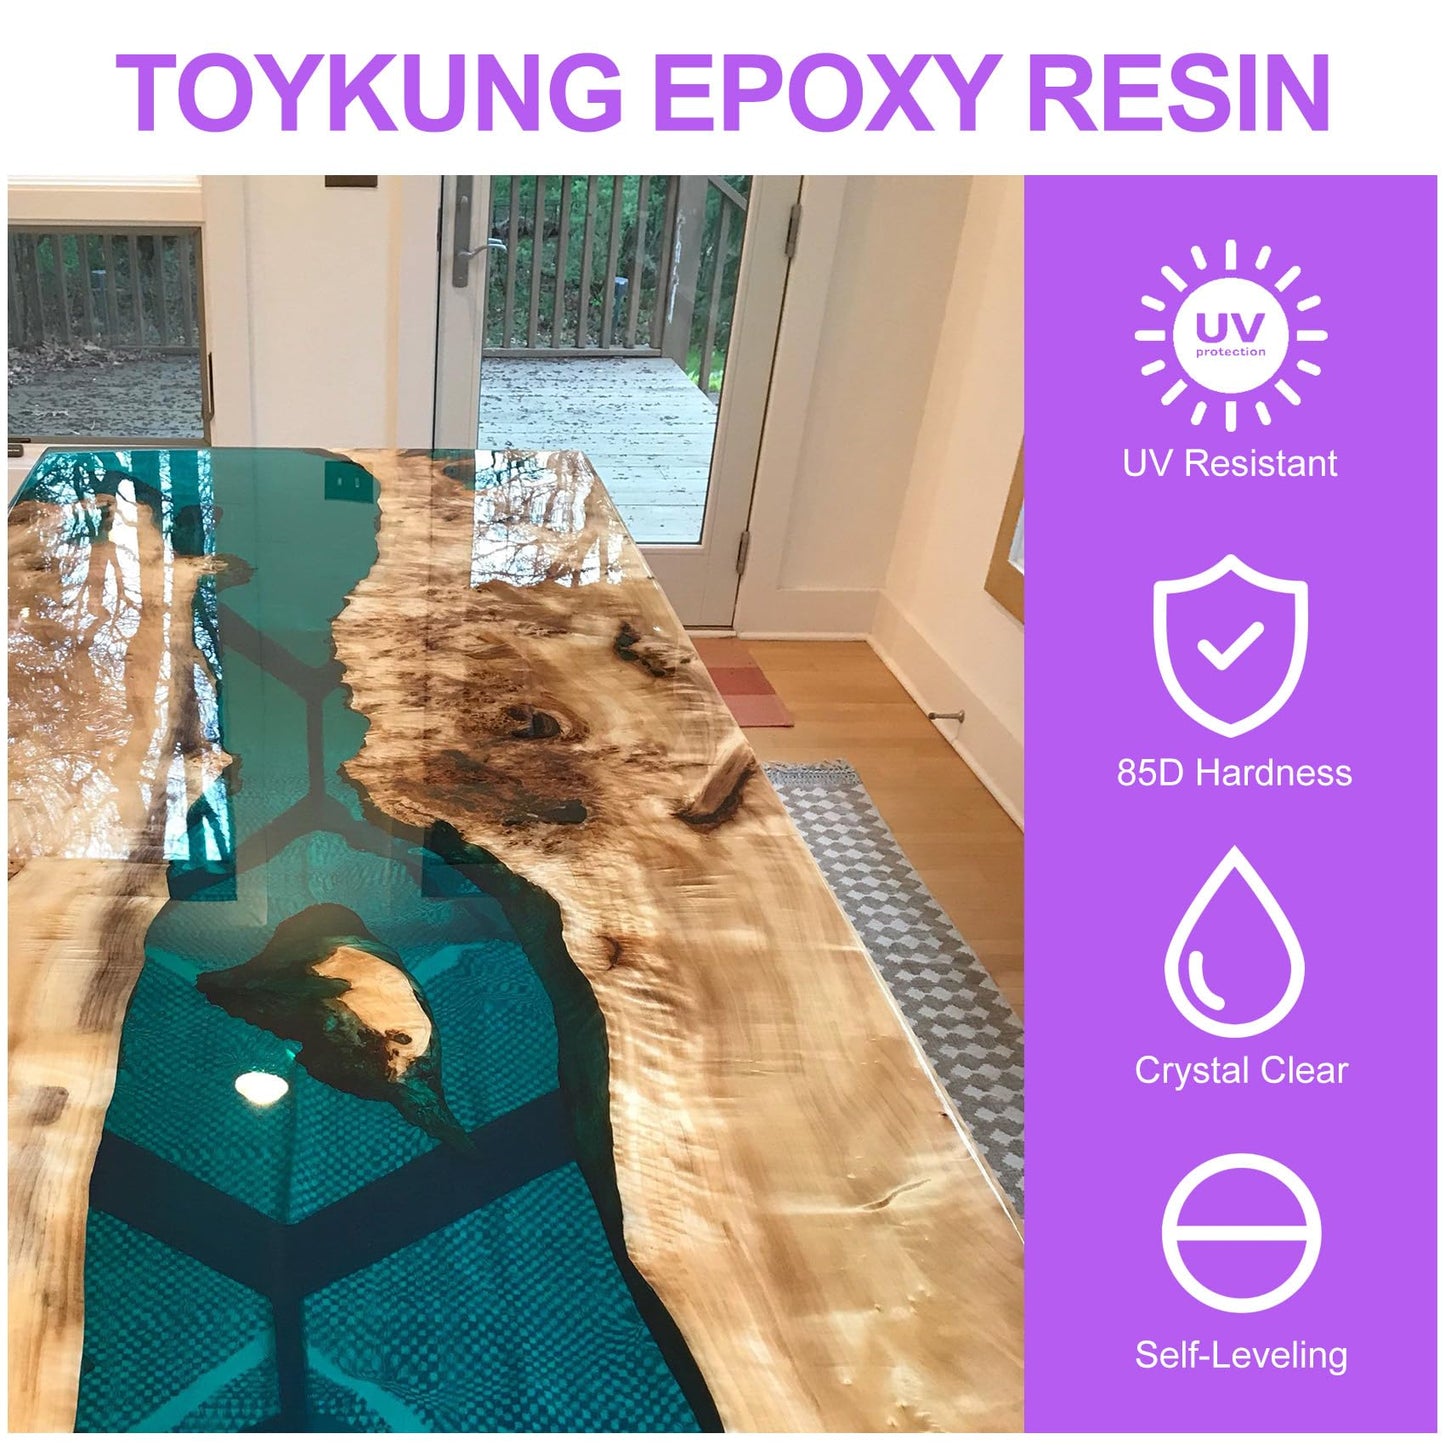 Deep Pour Epoxy Resin, 1.5 Gallon 2 to 4 Inch Depth Epoxy Resin Kit Crystal Clear Bubble Free High Gloss Self Leveling for River Table Top, Bar Top,